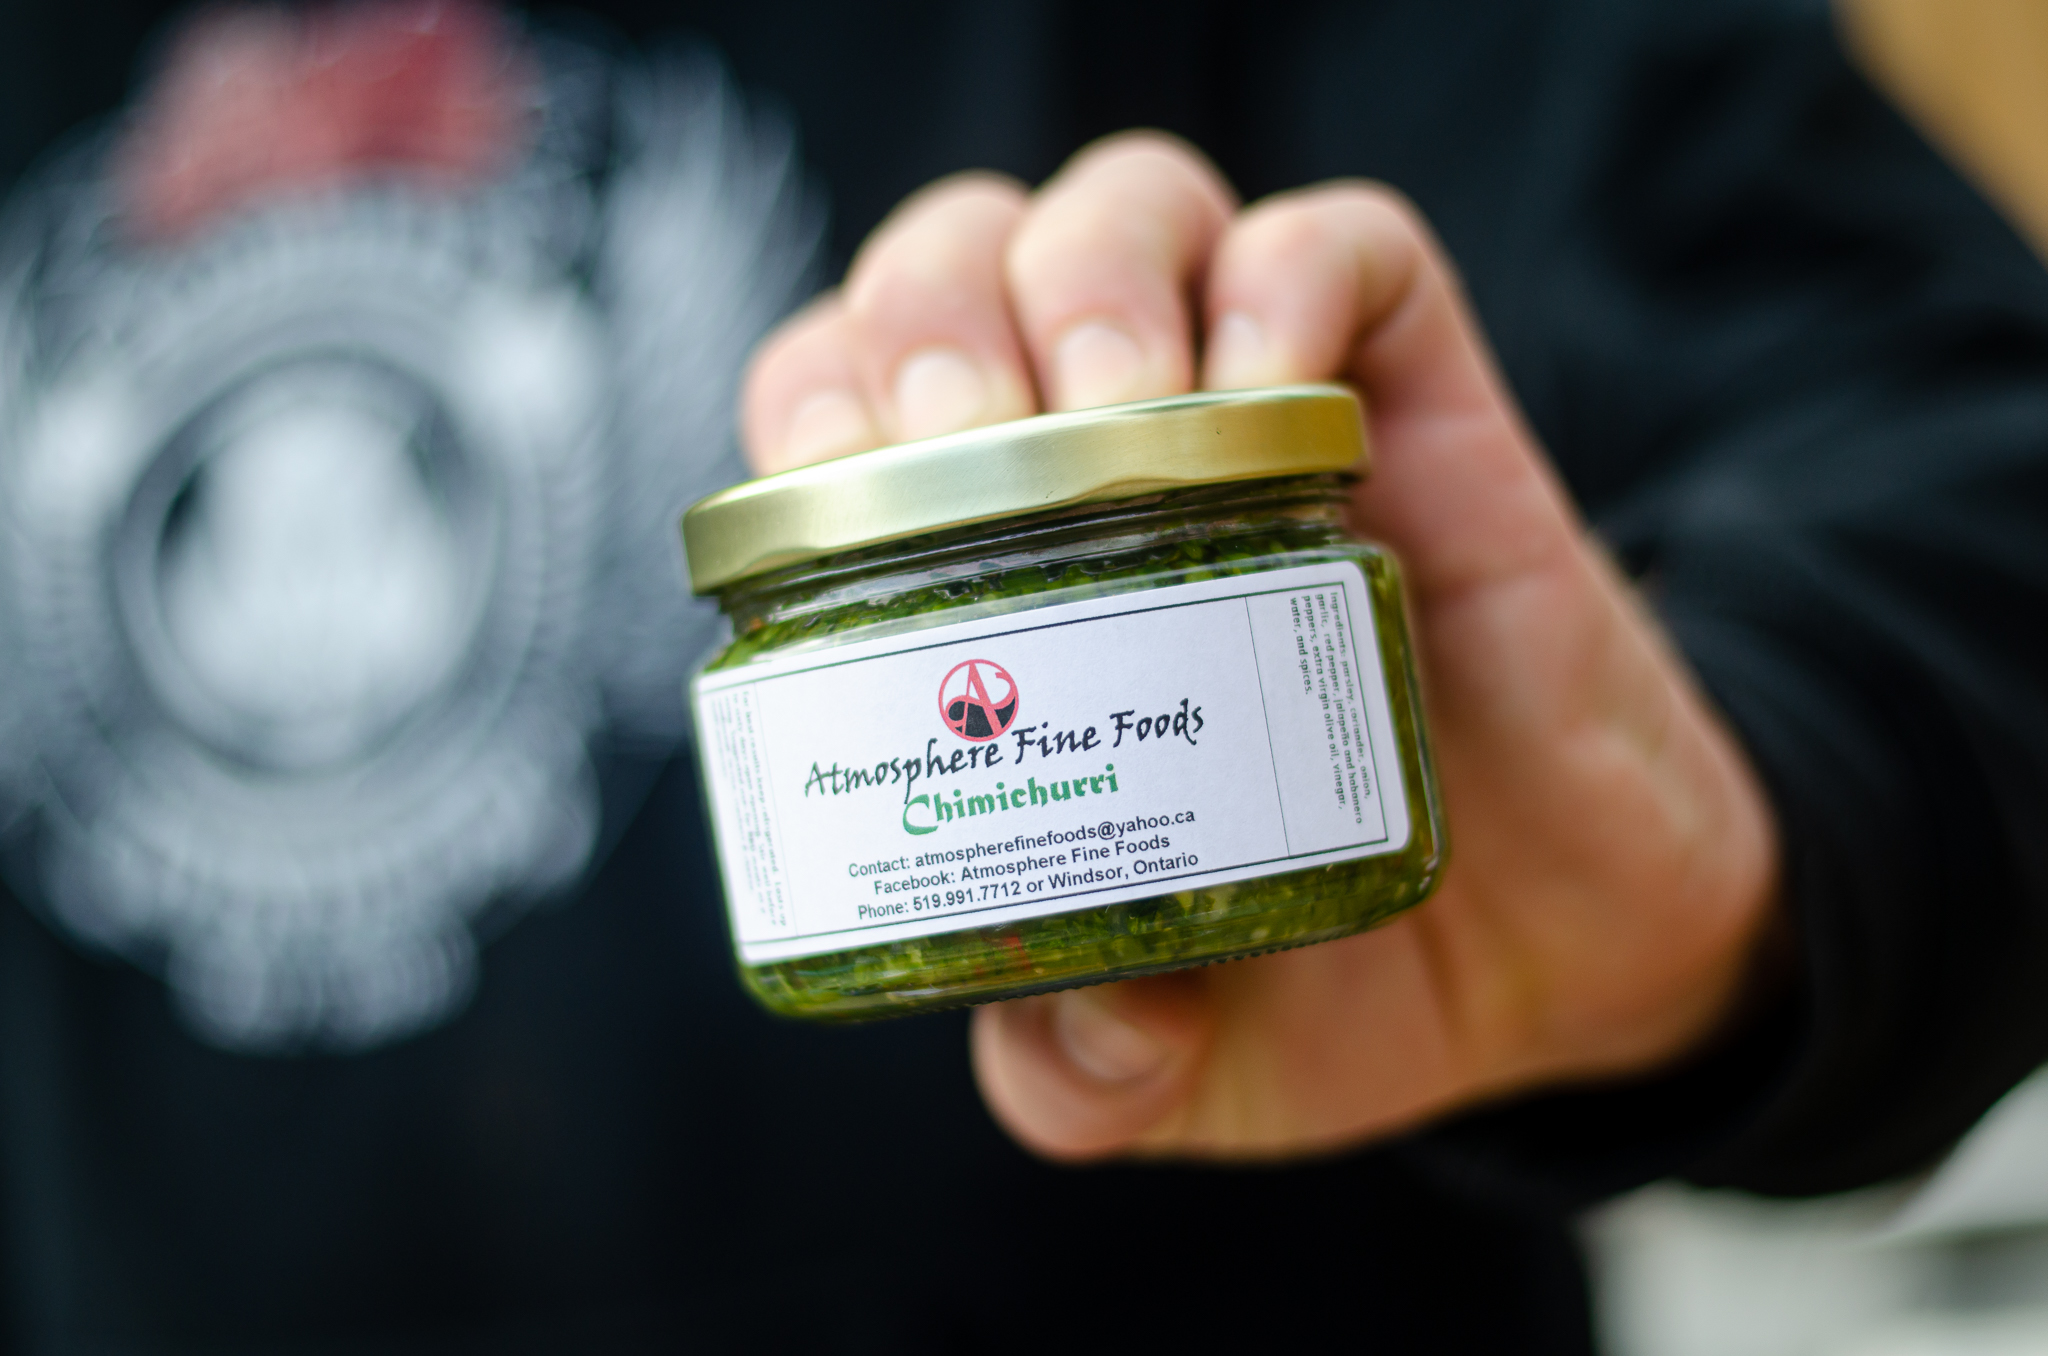 Chimichurri from Atmosphere Fine Foods in Windsor, Ontario.